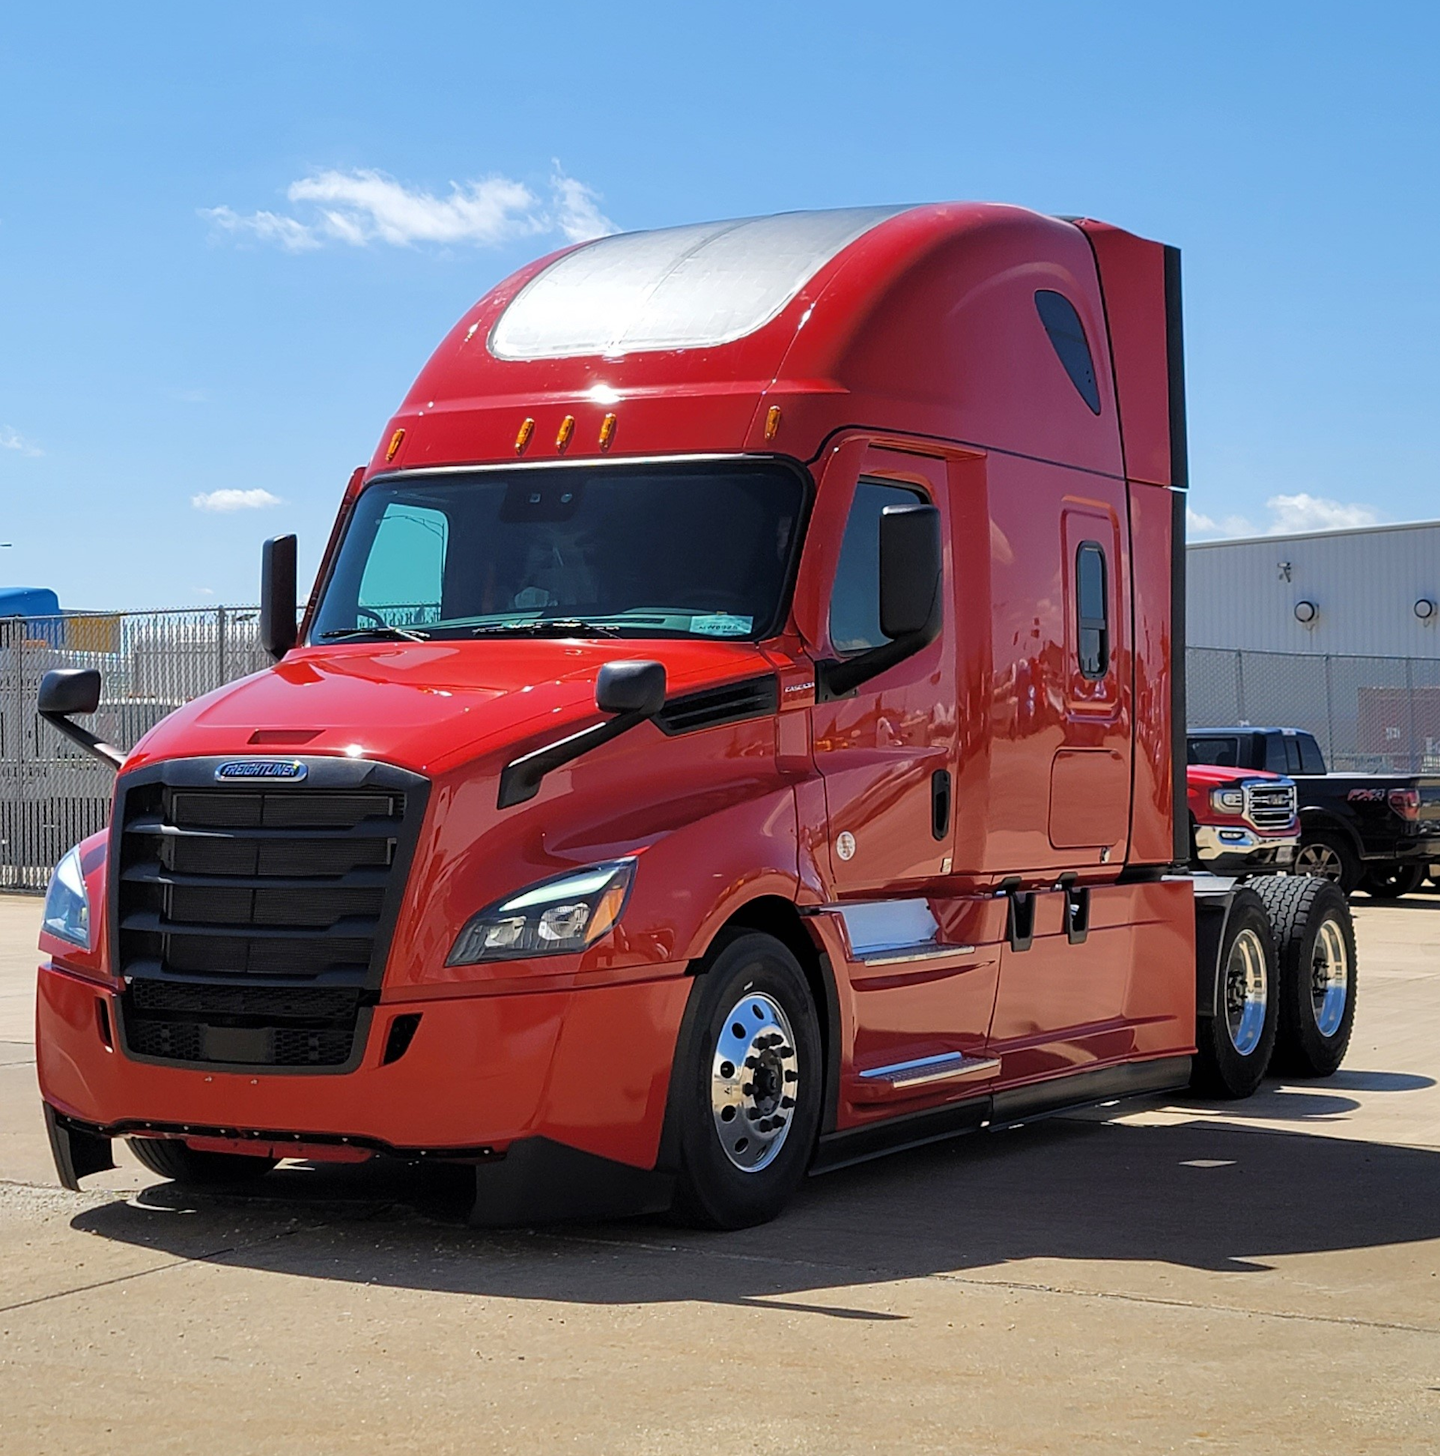 SuperTruck 3 Projects Awarded More than $127 million by U.S. DOE